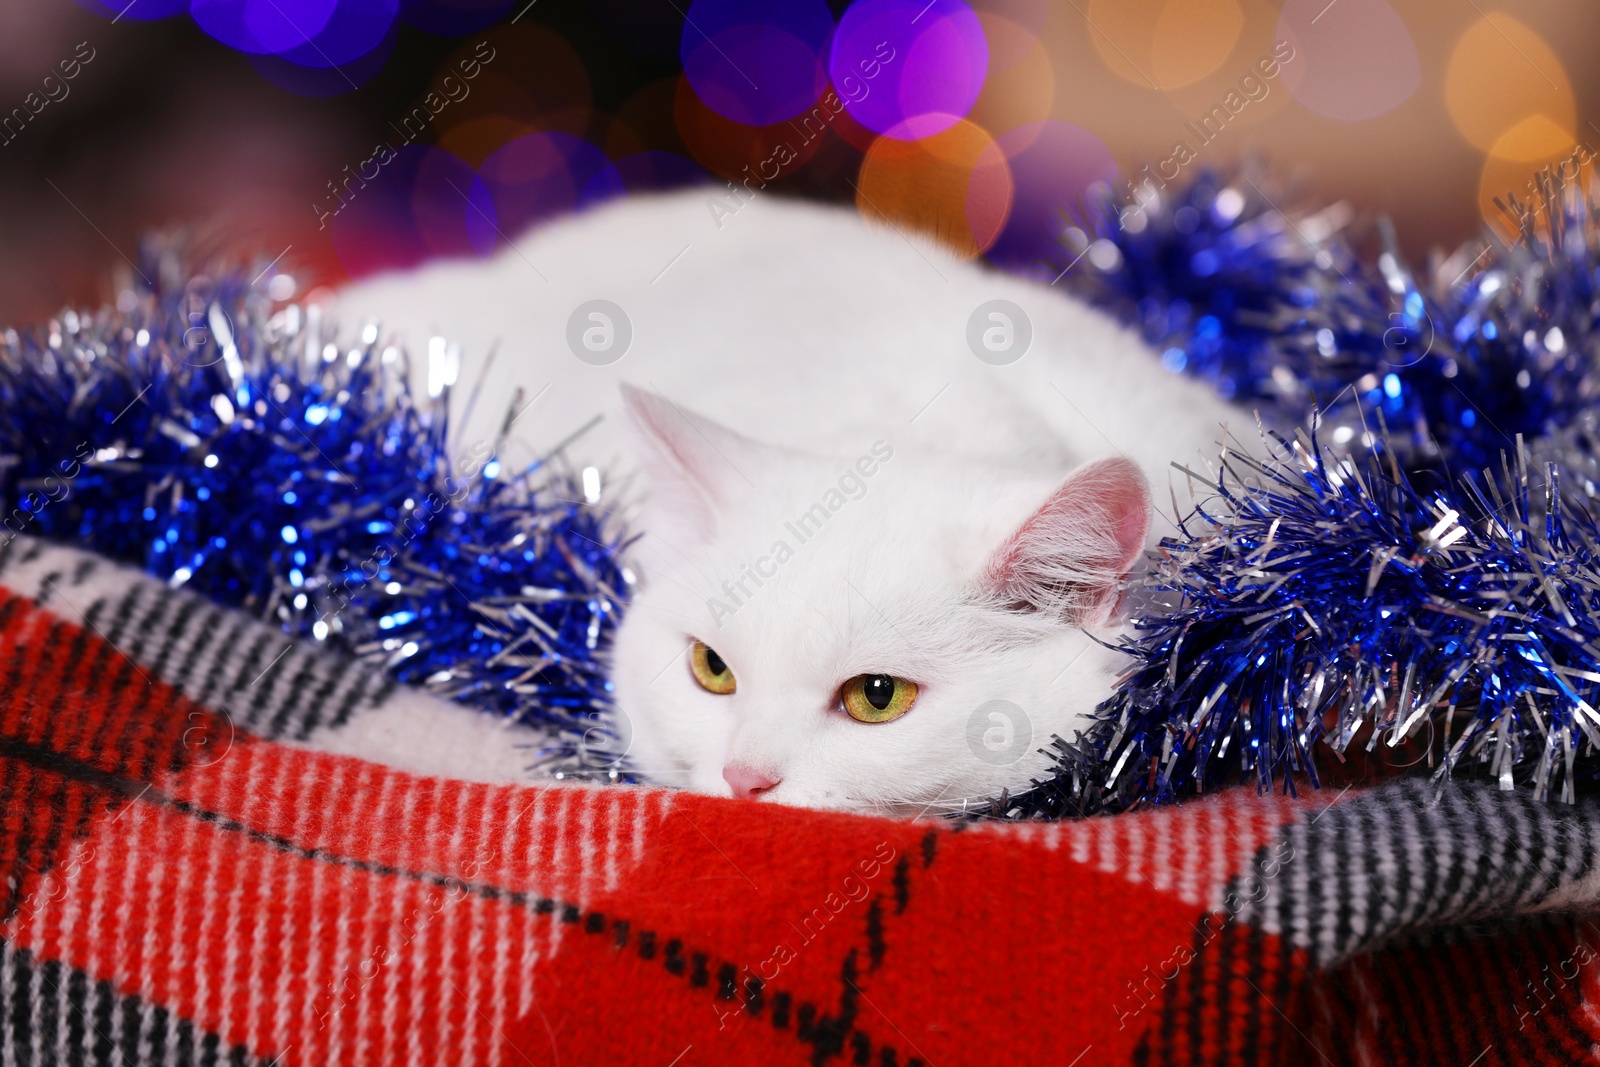 Photo of Adorable cat with Christmas tinsel lying on blanket against blurred lights